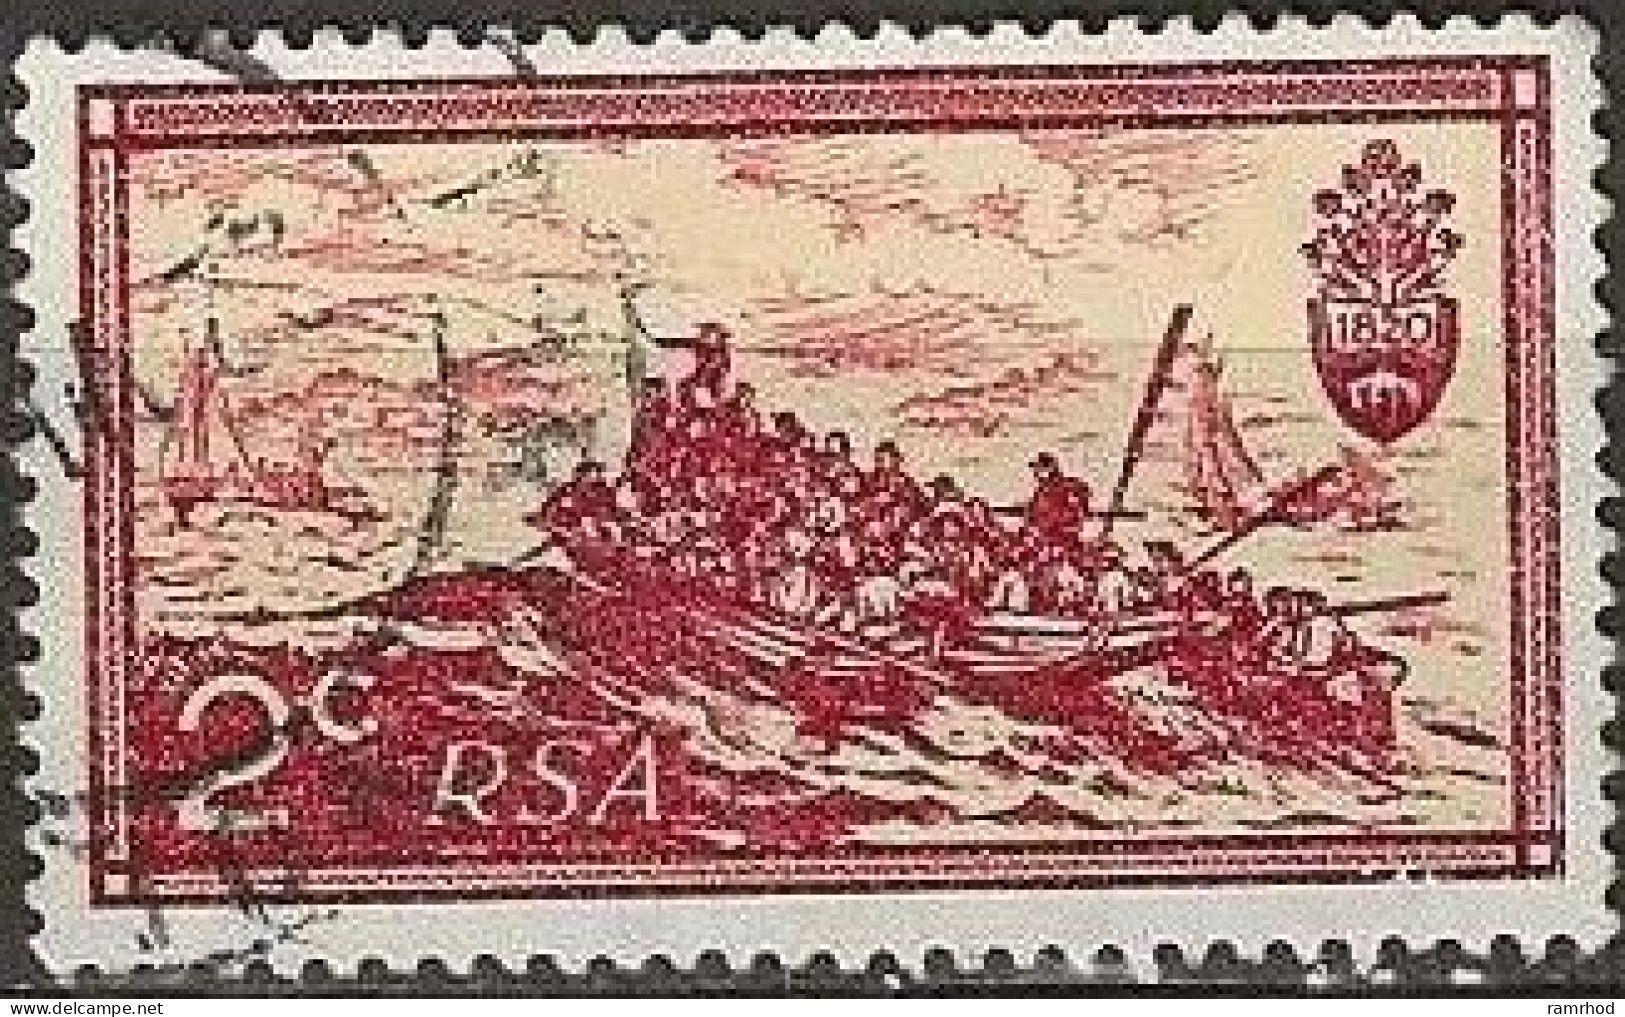 SOUTH AFRICA 1971 Tenth Anniversary Of Republic Of South Africa. - 2c Landing Of British Settlers, 1820 (T. Baines) FU - Used Stamps